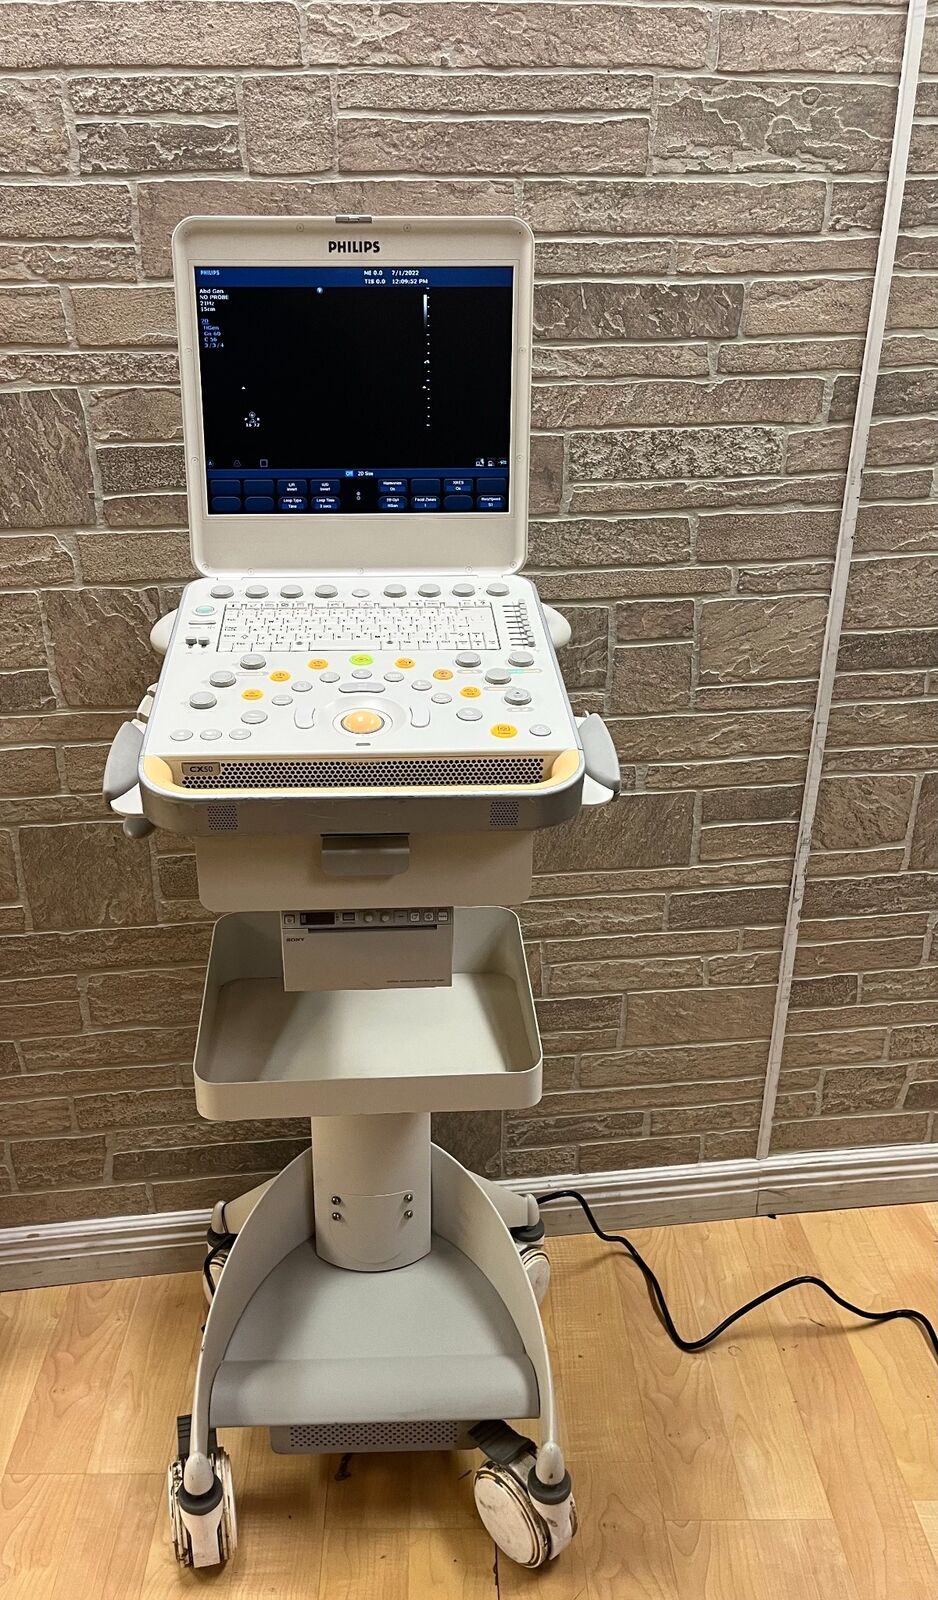 Philips CX50 Ultrasound Scanner Machine 2011 with cart and Linear Probe L12-3 DIAGNOSTIC ULTRASOUND MACHINES FOR SALE